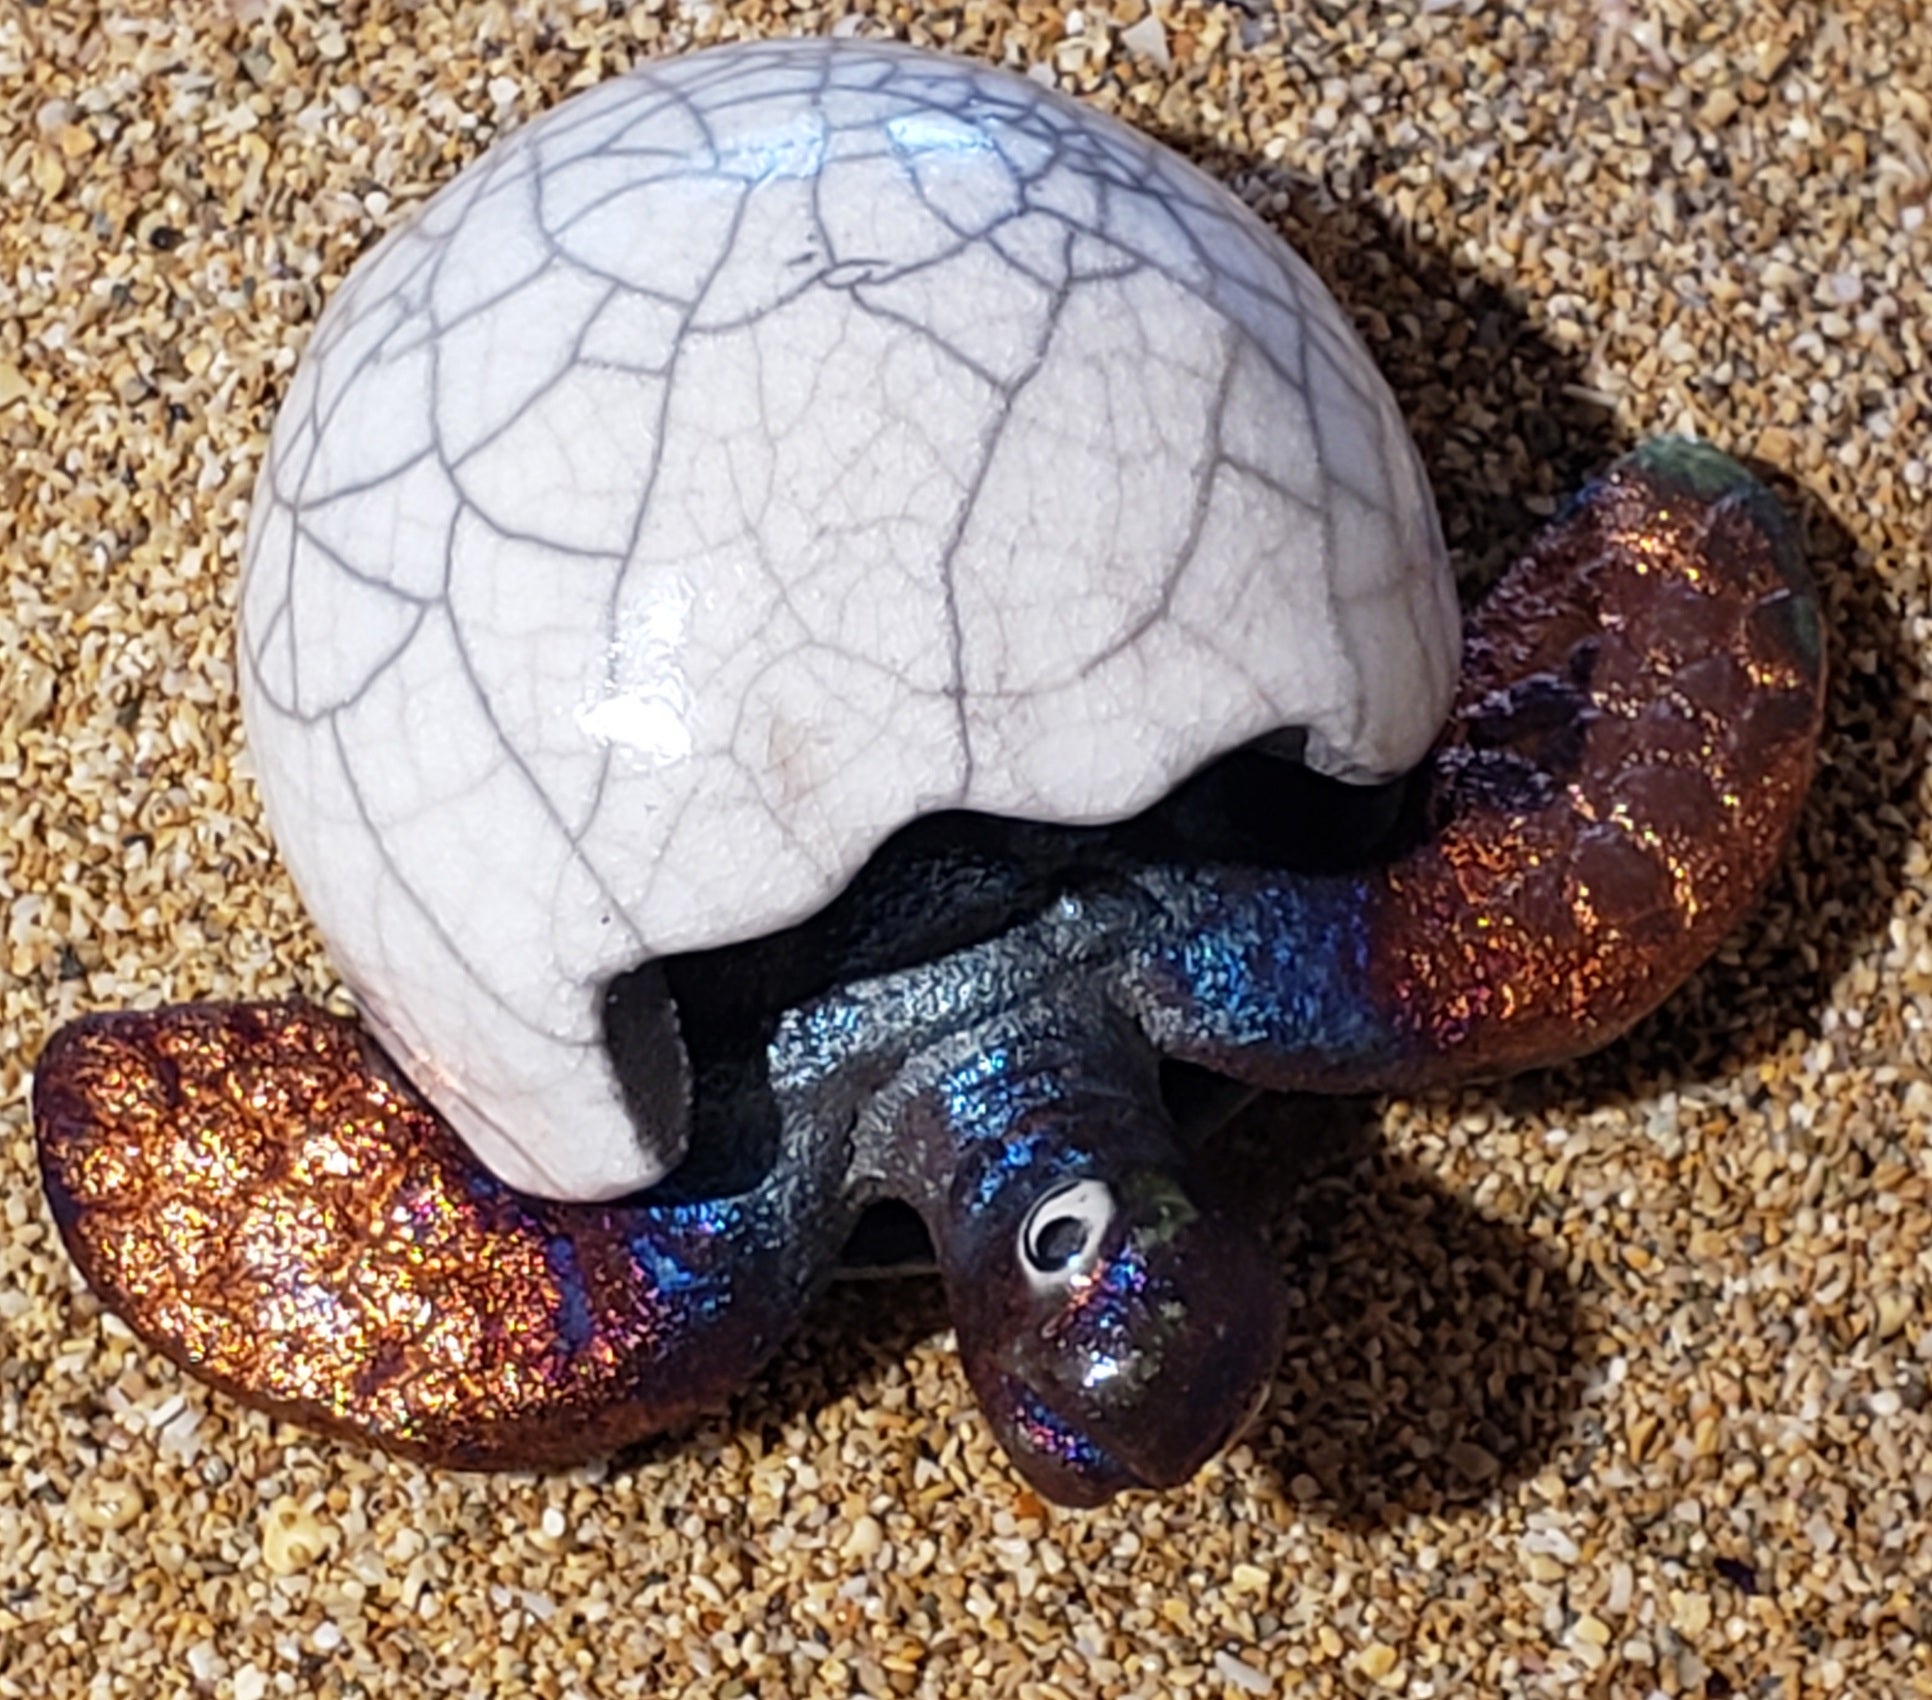 Ceramic Turtle Hatching from Egg 2 3/4" wide